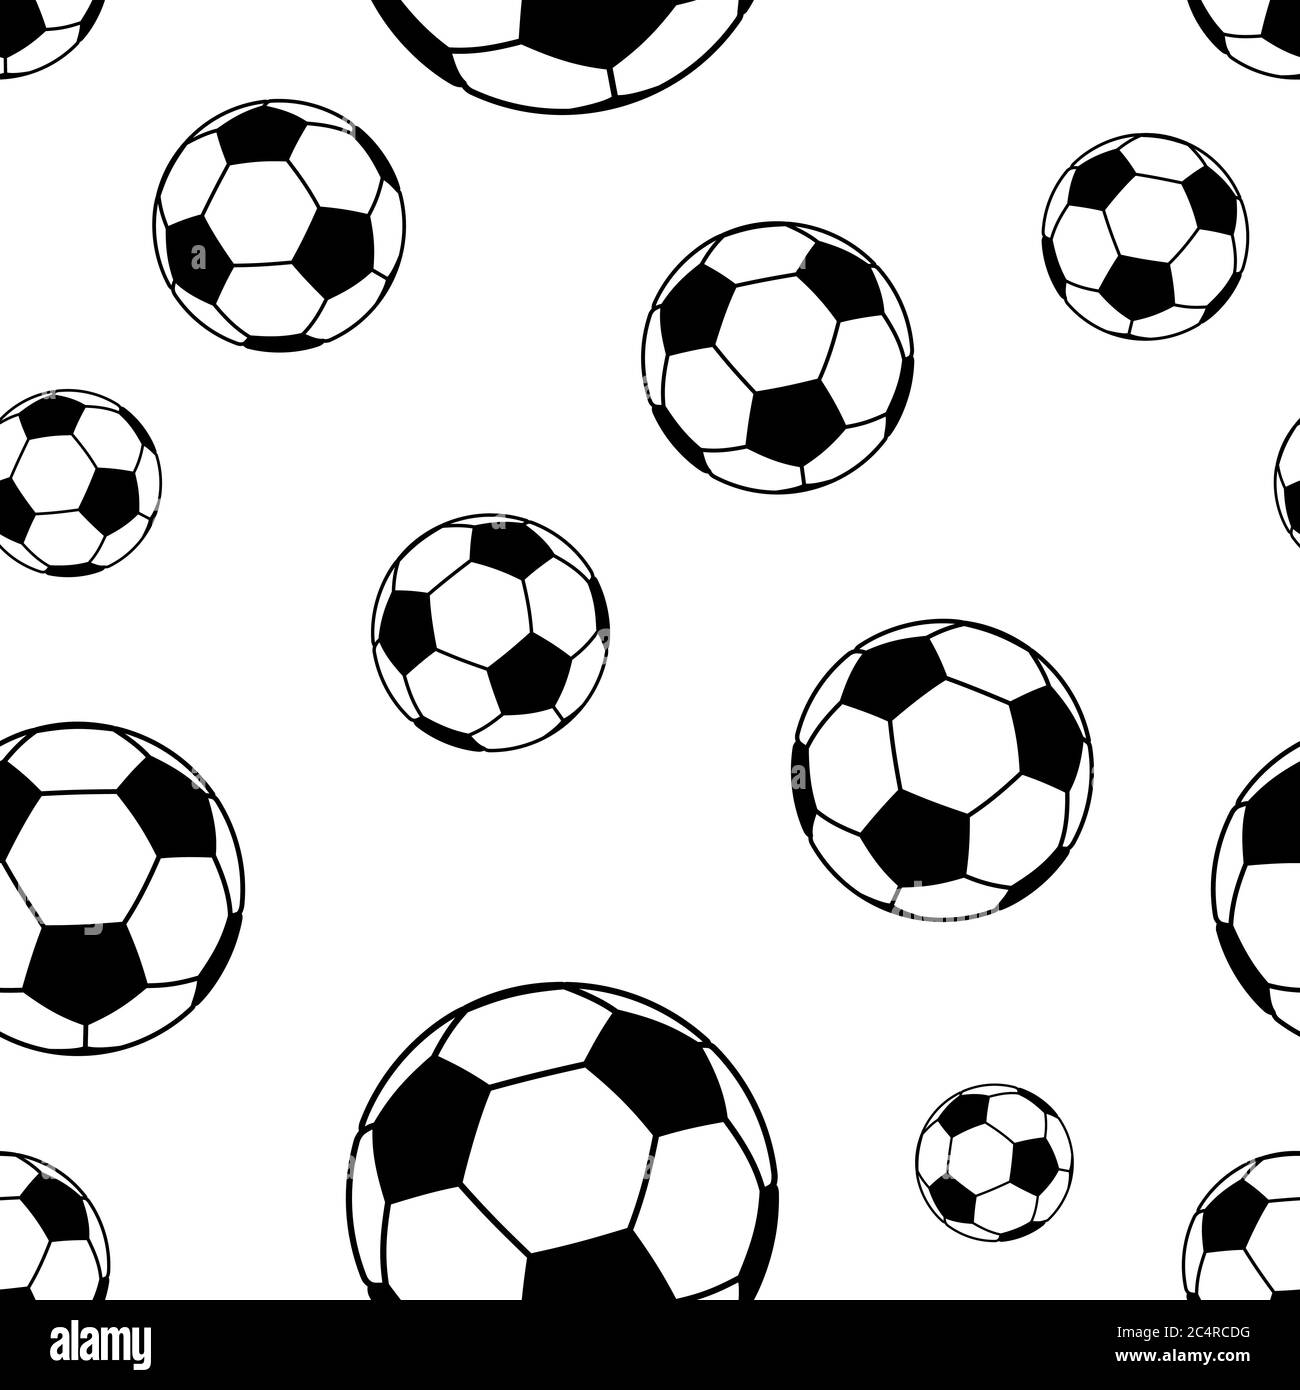 Soccer balls black and white stock photos images